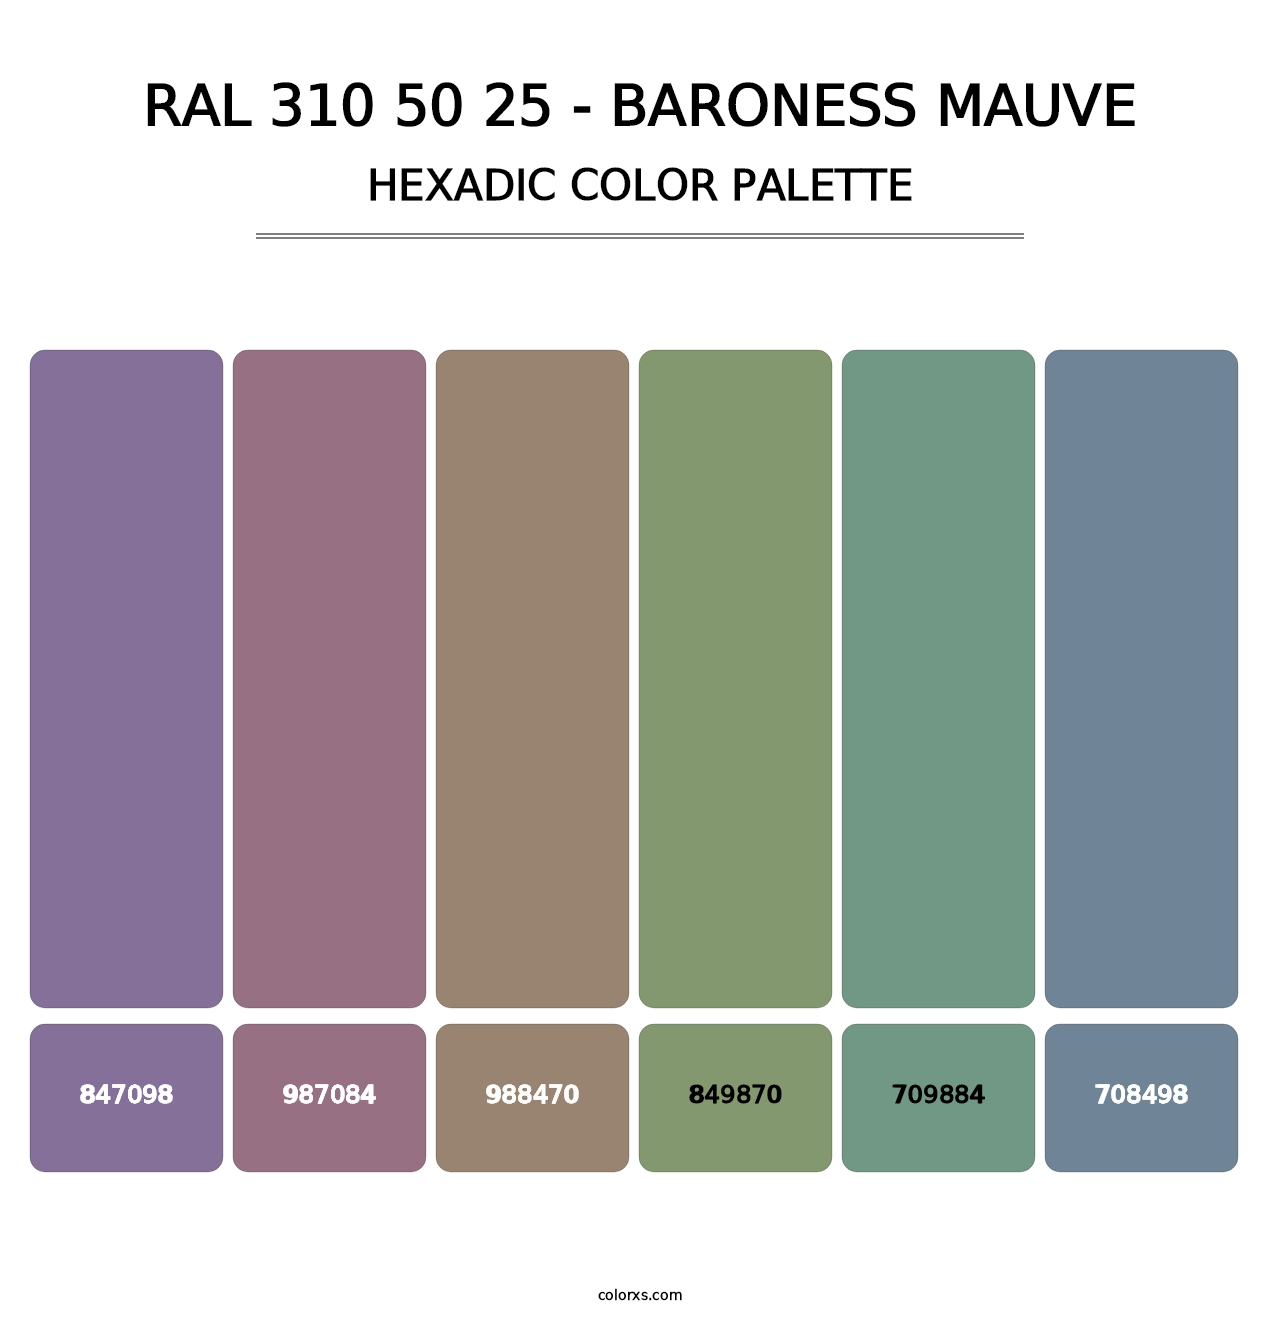 RAL 310 50 25 - Baroness Mauve - Hexadic Color Palette